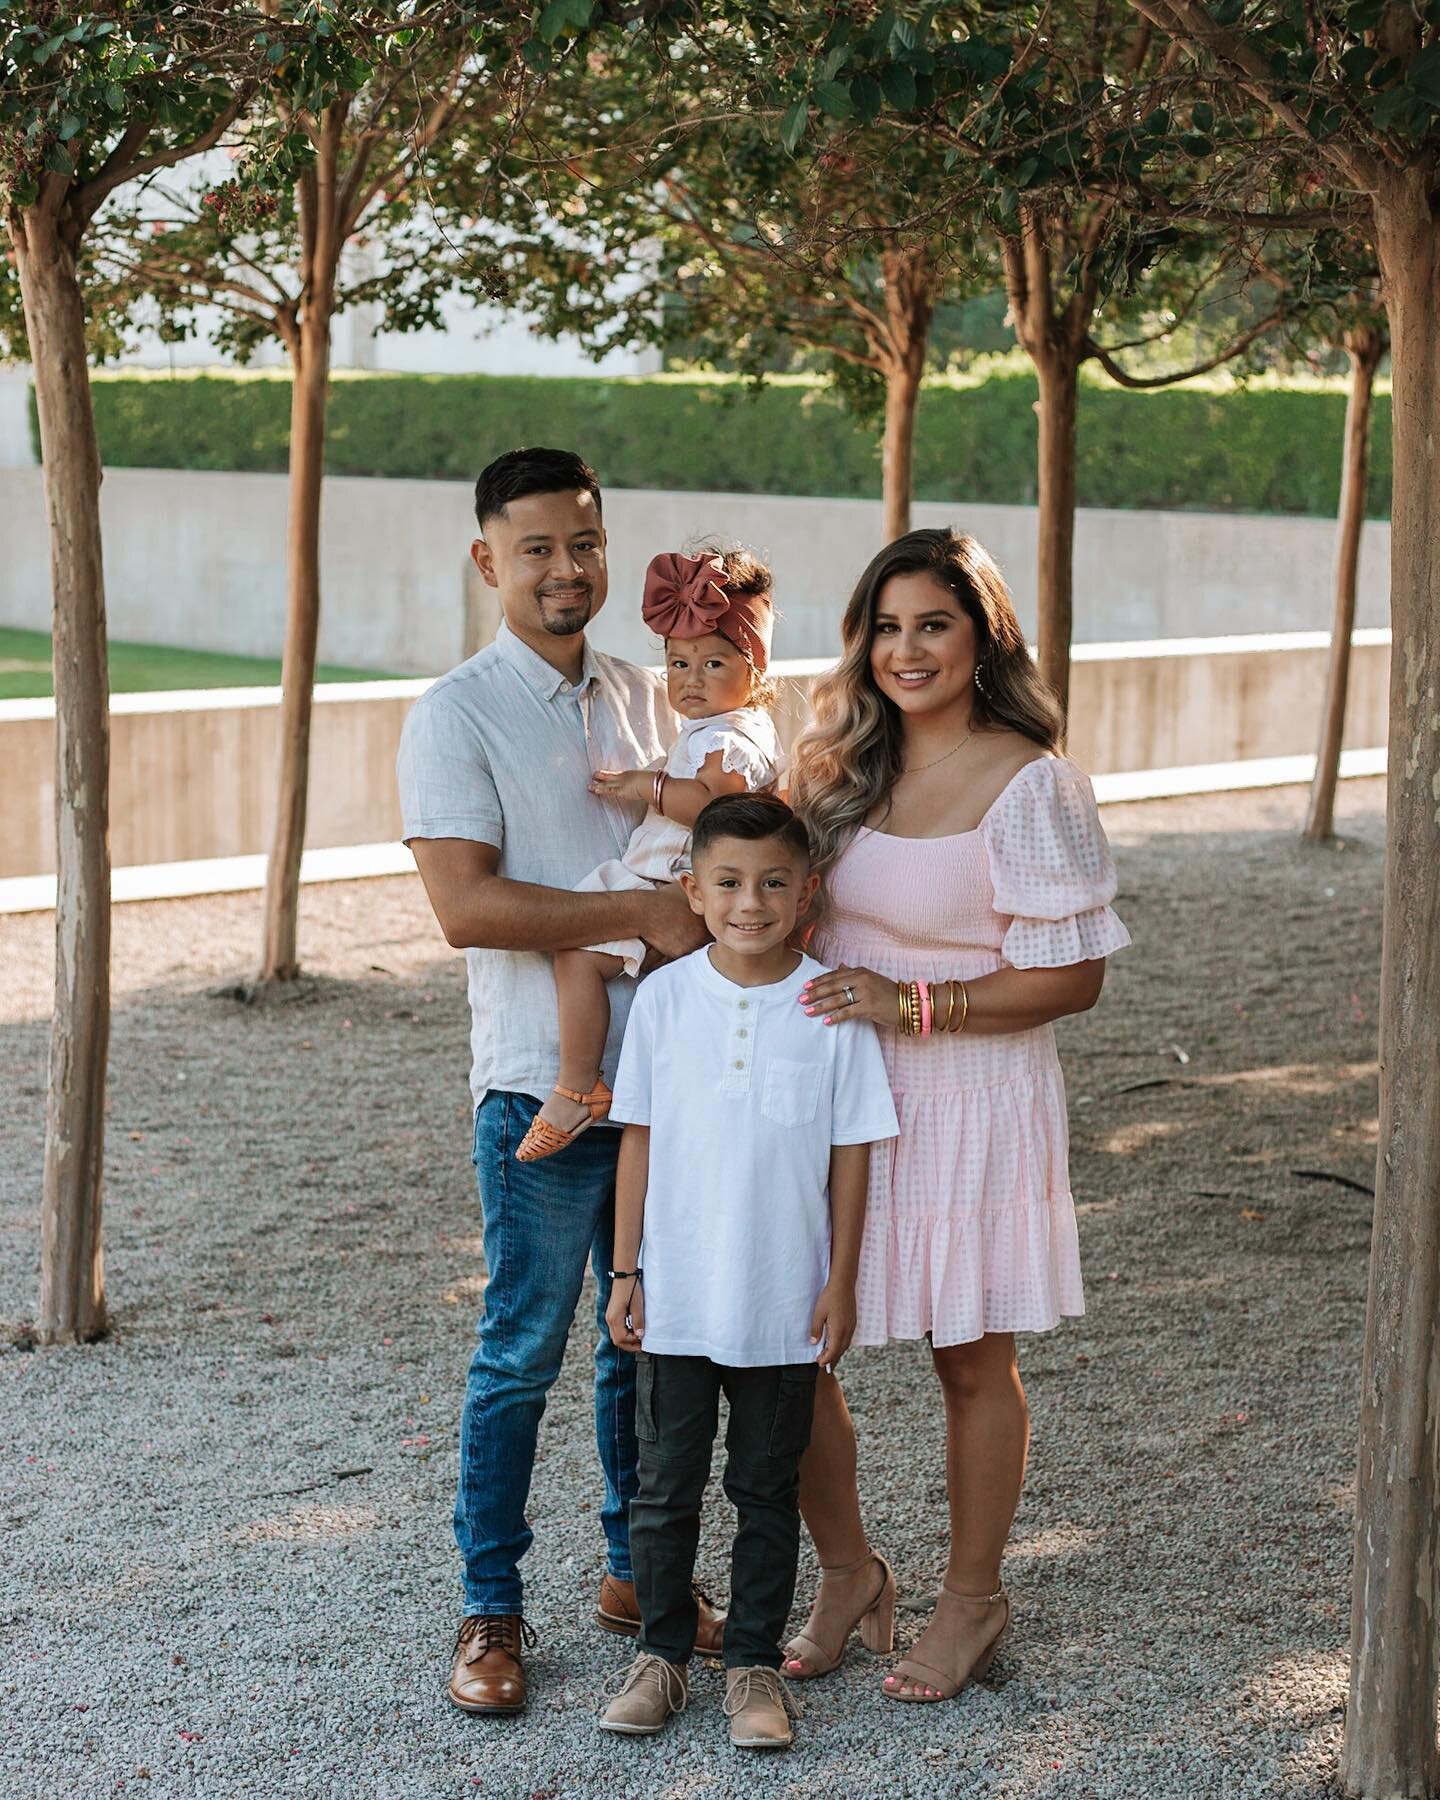 Shout out to the Texas families willing to withstand the heat to capture some memories! @mariellarodriguezzz #lavidaveraphoto
.
.
.
.
Tags.
#familyphoto #familyphotography #family #familyphotographer #photography #newbornphotography #love #photograph